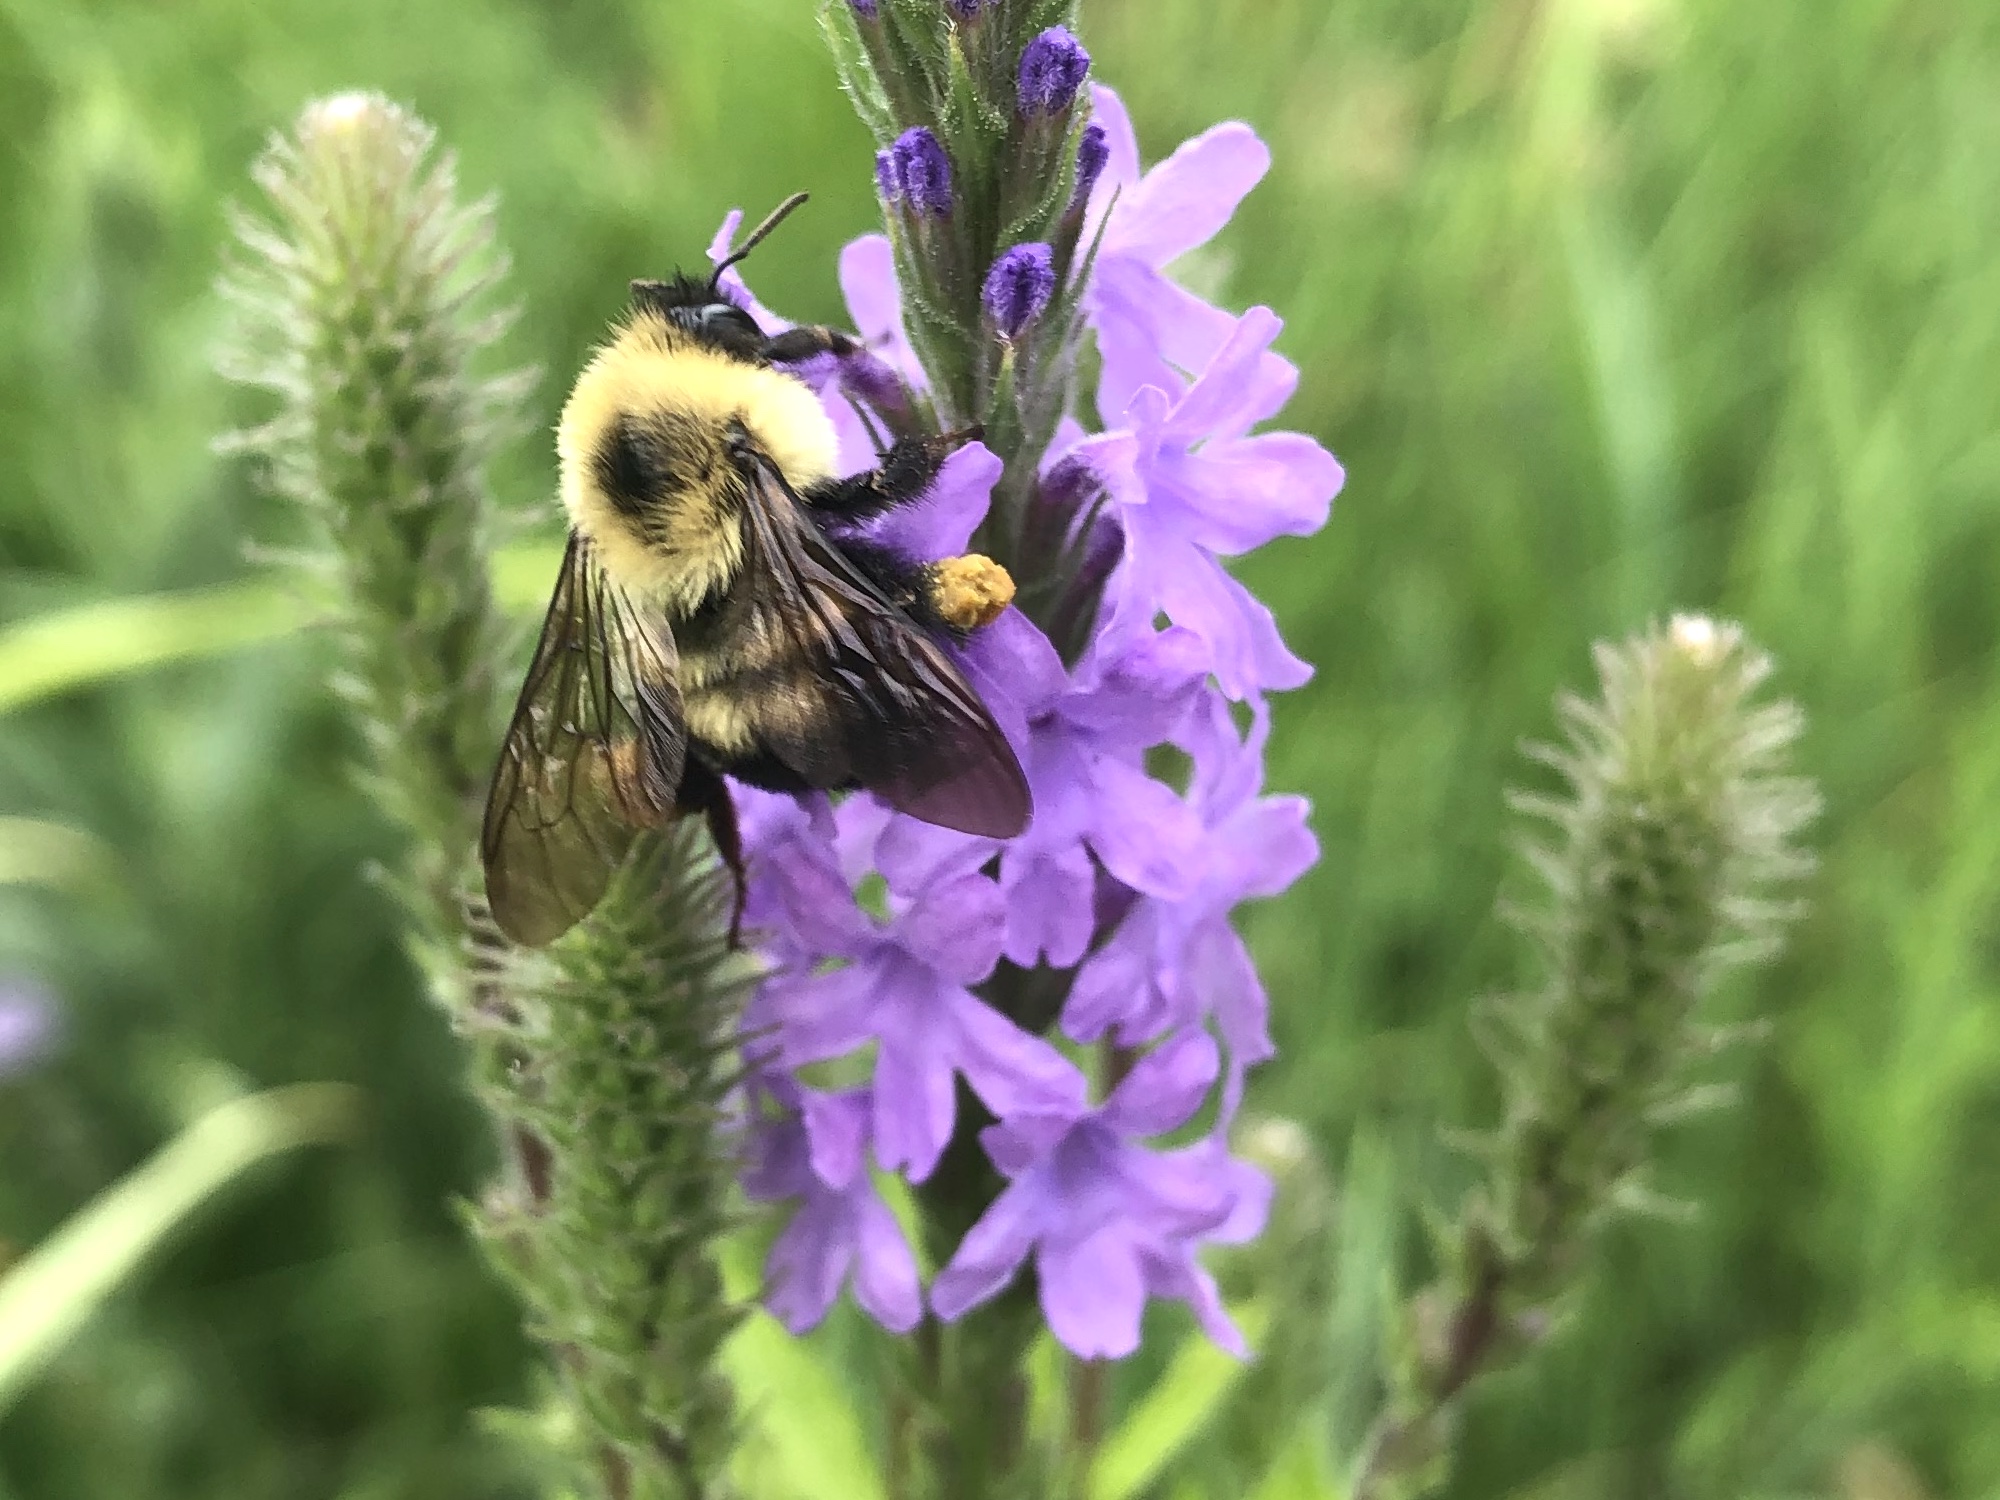 Bumblebee on Hoary Vervain off of Bike Path behind Gregory Street in Madison, Wisconsin on June 28, 2021.